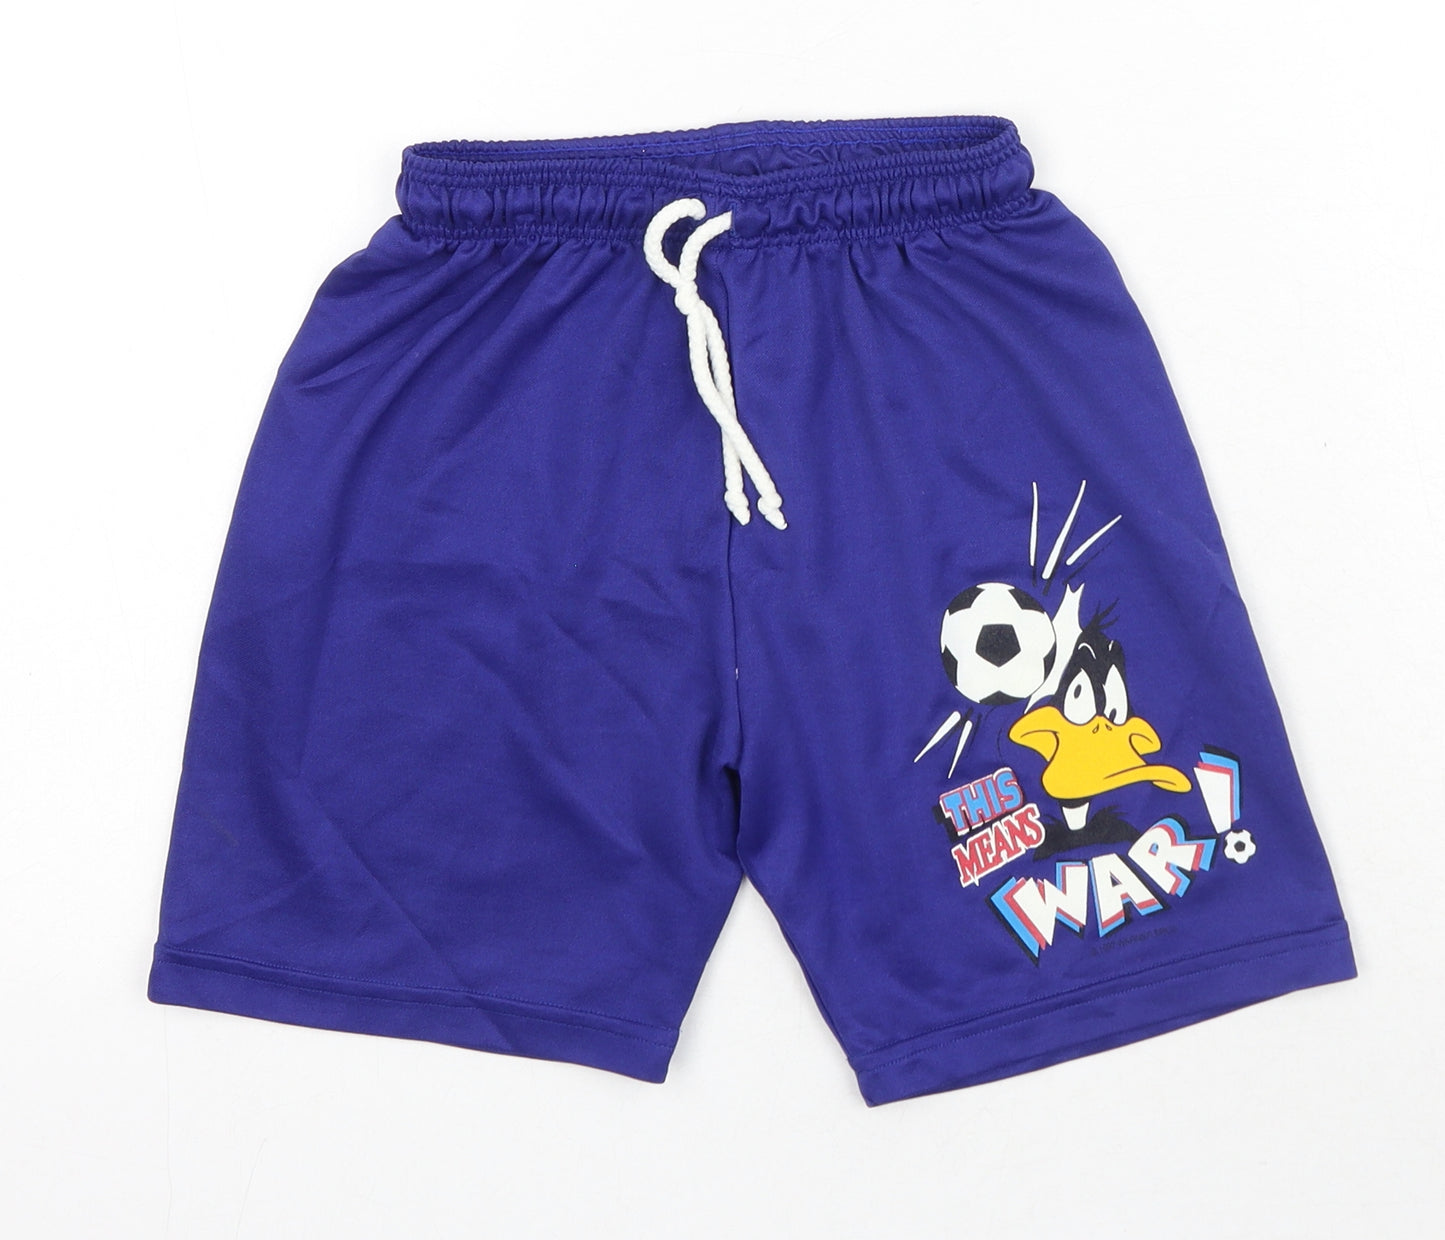 Tesco Boys Blue Polyester Sweat Shorts Size 7-8 Years Regular Drawstring - Daffy Duck This Means War